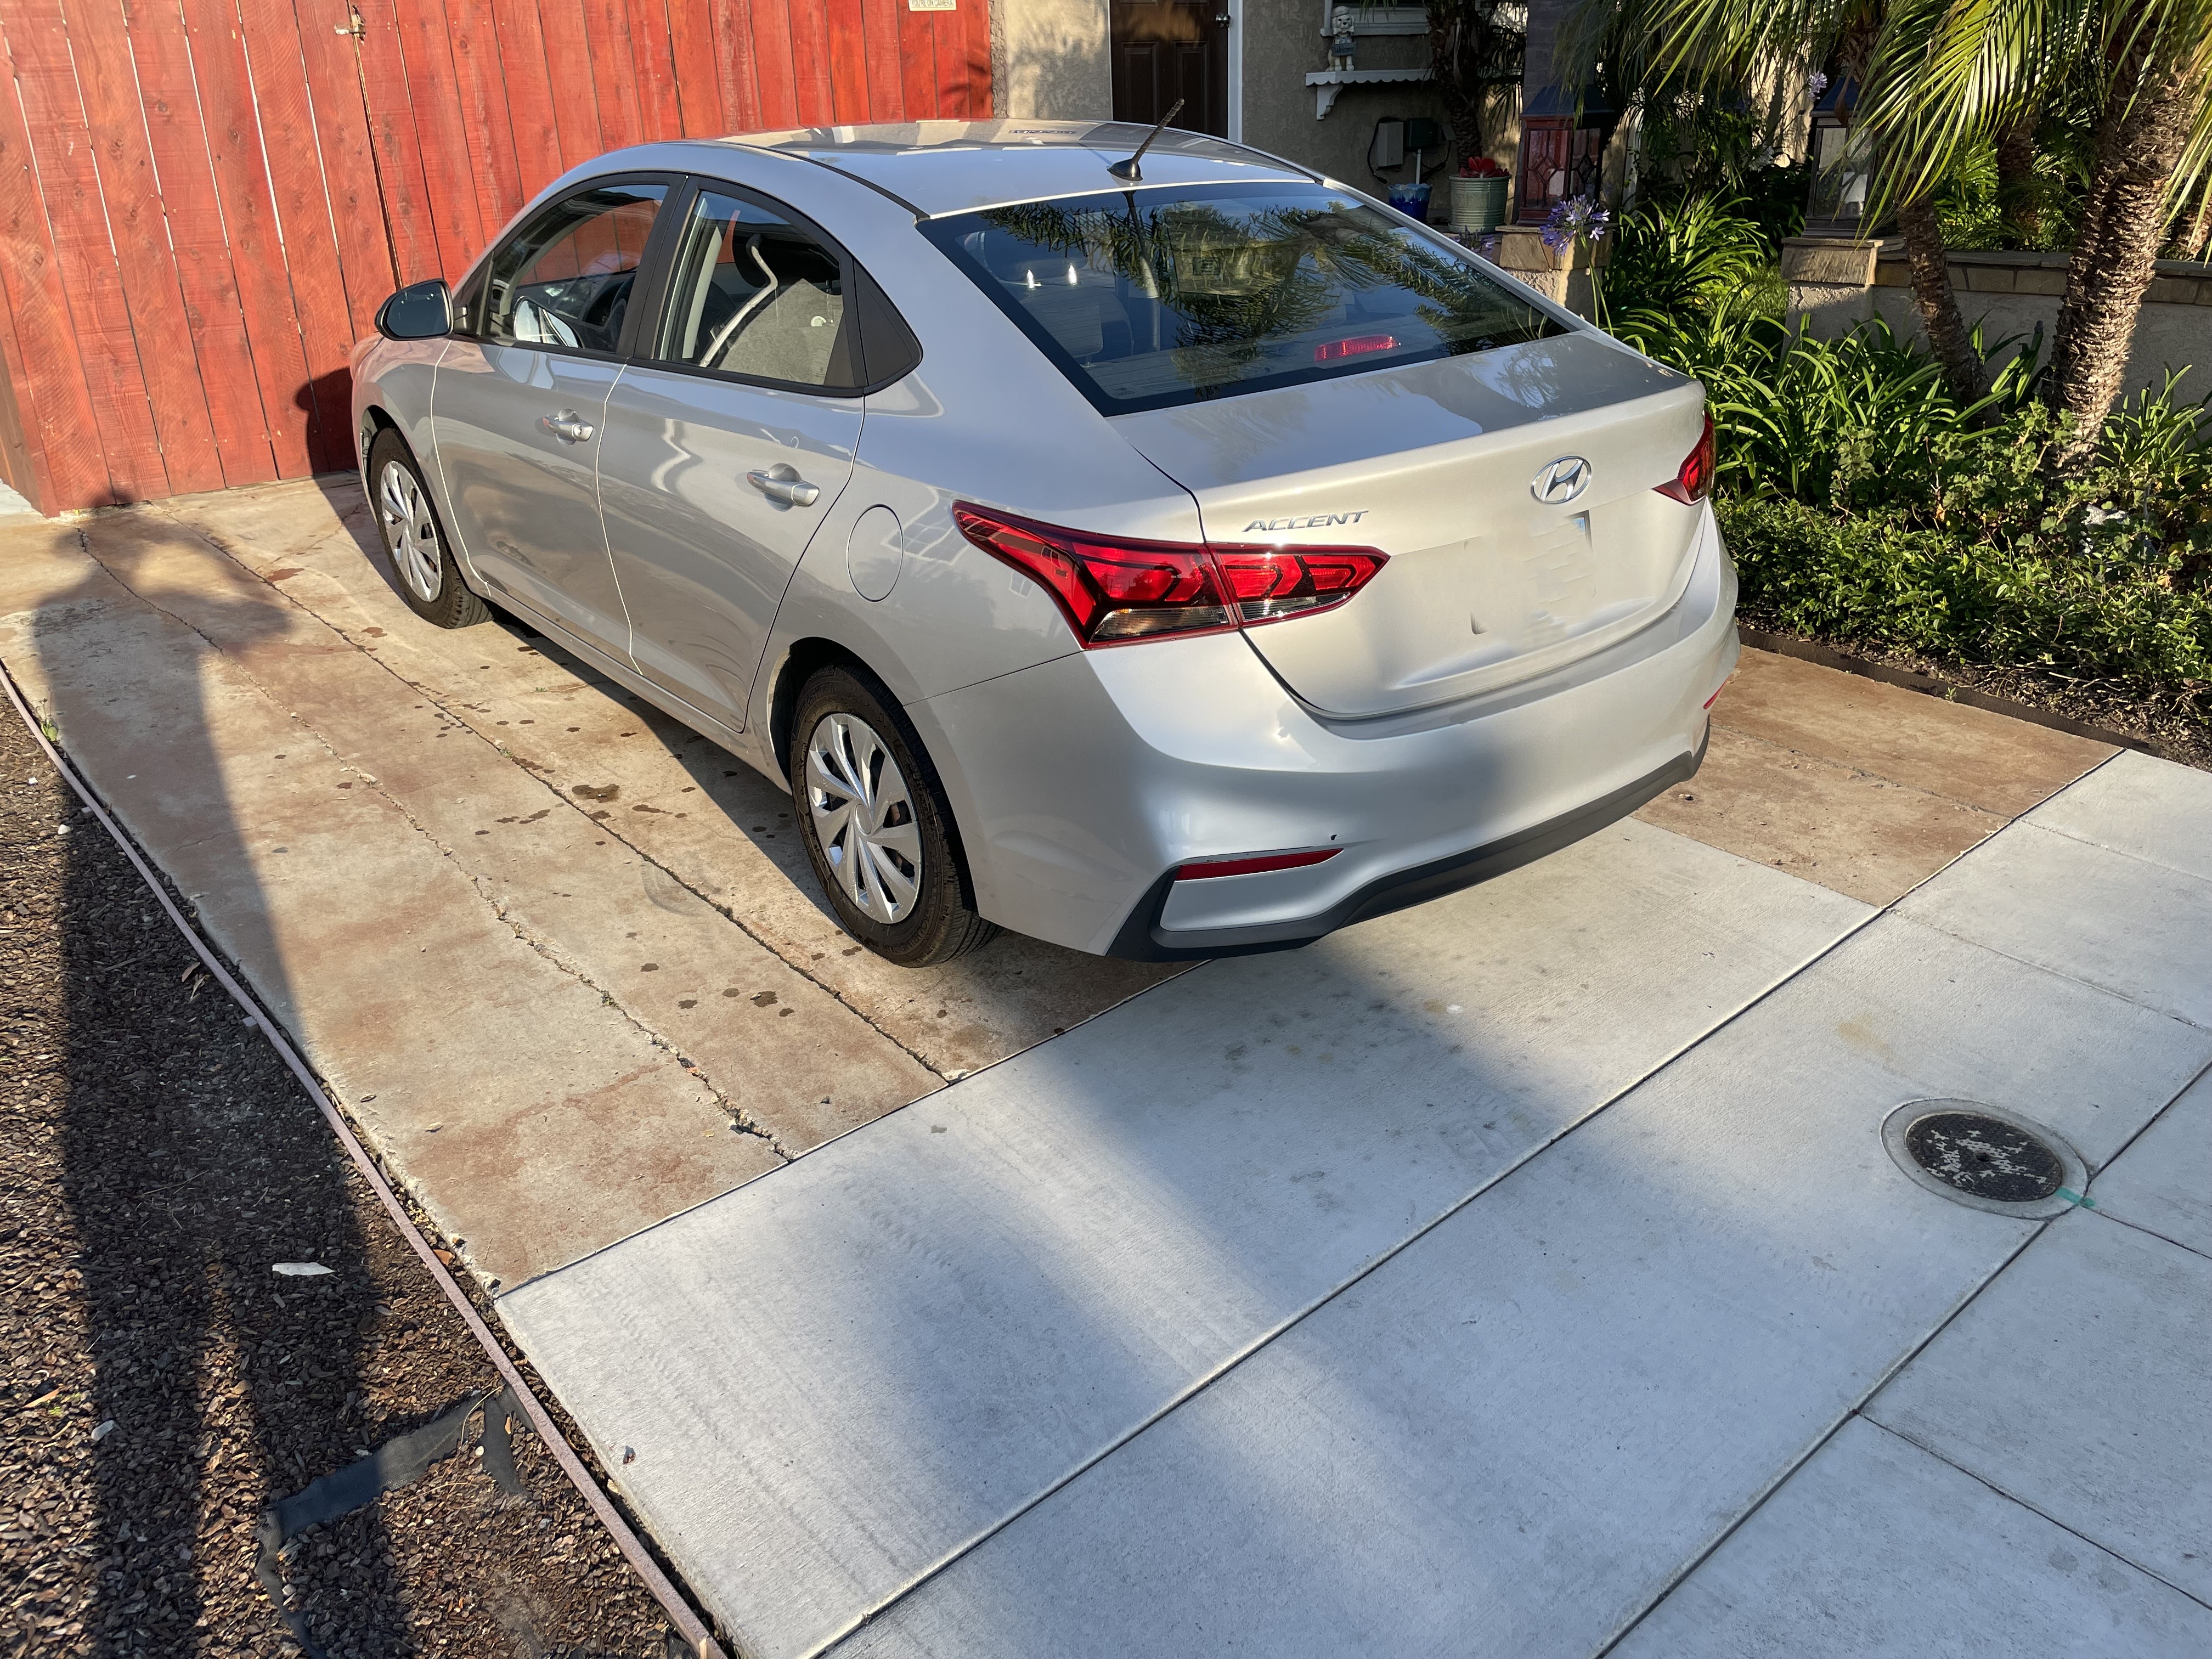 2020 Hyundai Accent Review - Autotrader